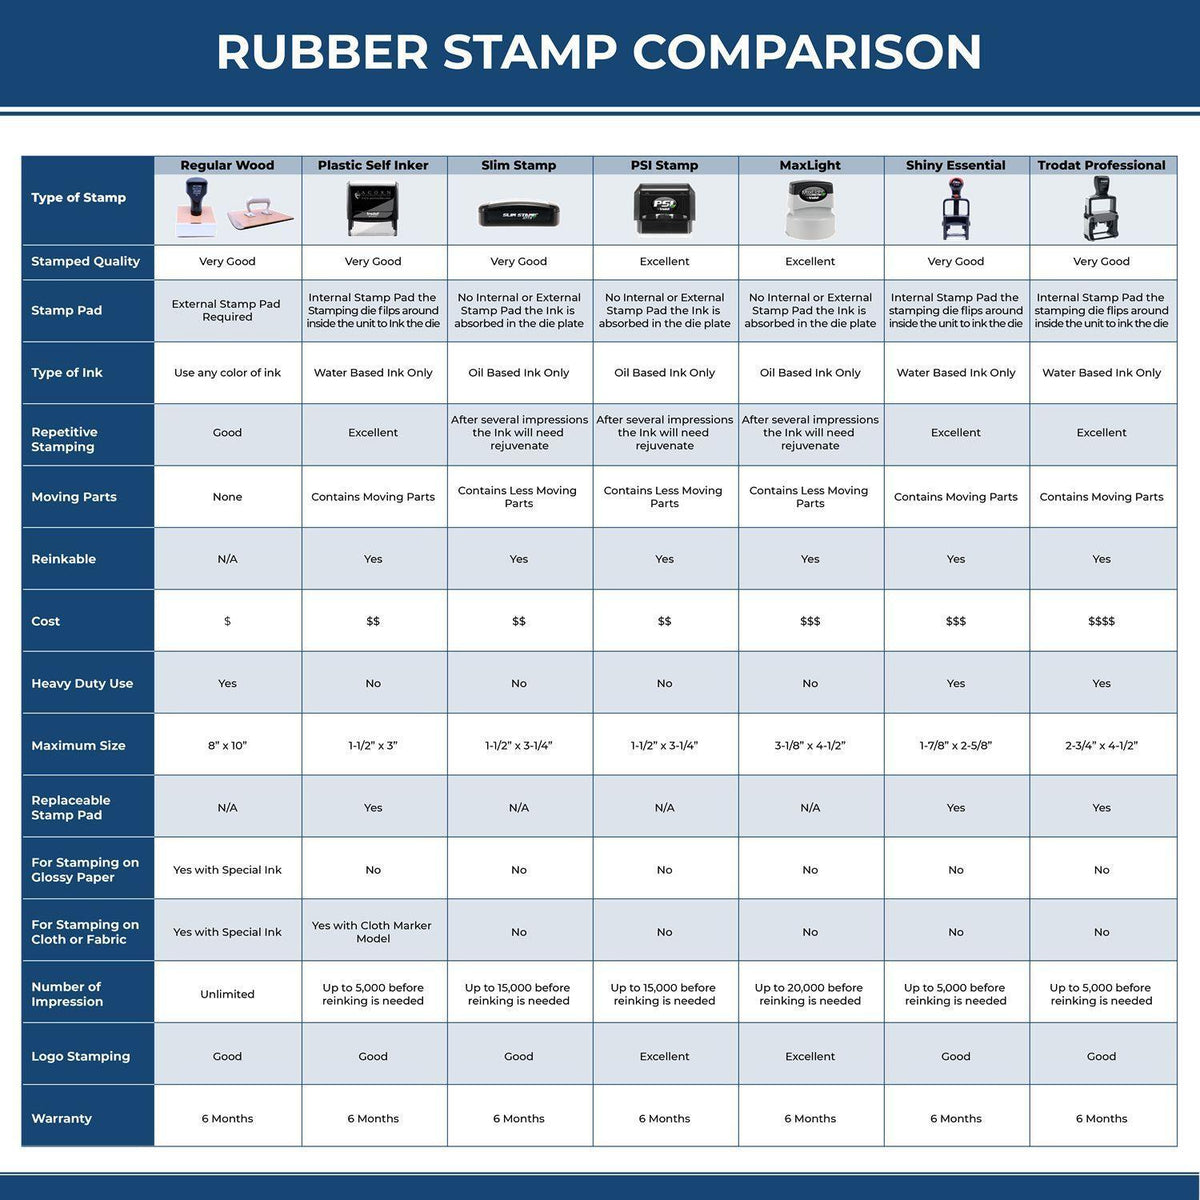 Large Pre Inked Parent Signature Required Stamp 4689SLIM Rubber Stamp Comparison